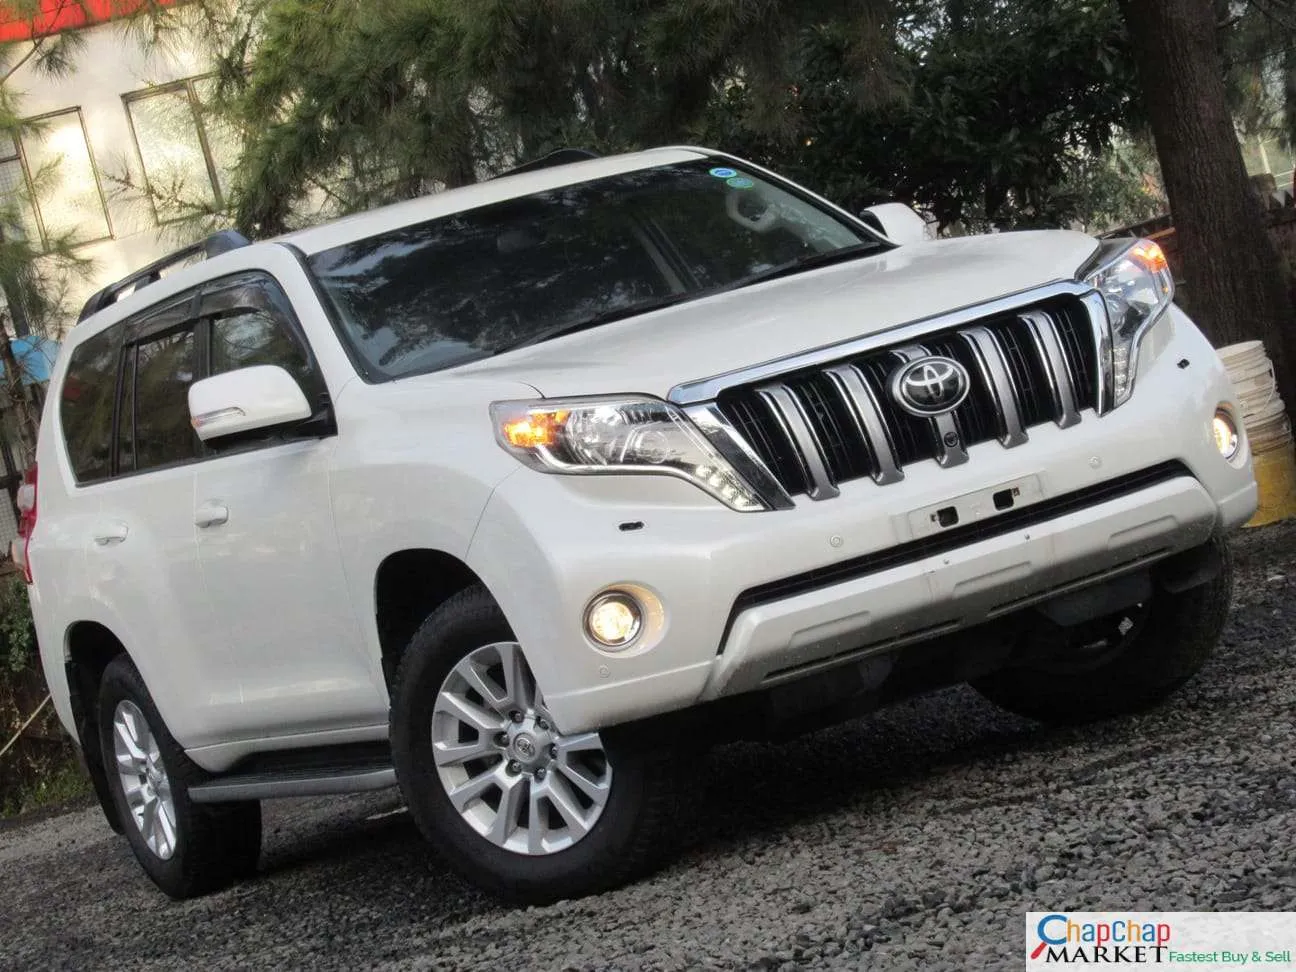 Cars Cars For Sale/Vehicles-Toyota Prado TZG 18k mileage QUICK SALE Fully loaded trade in Ok EXCLUSIVE 9